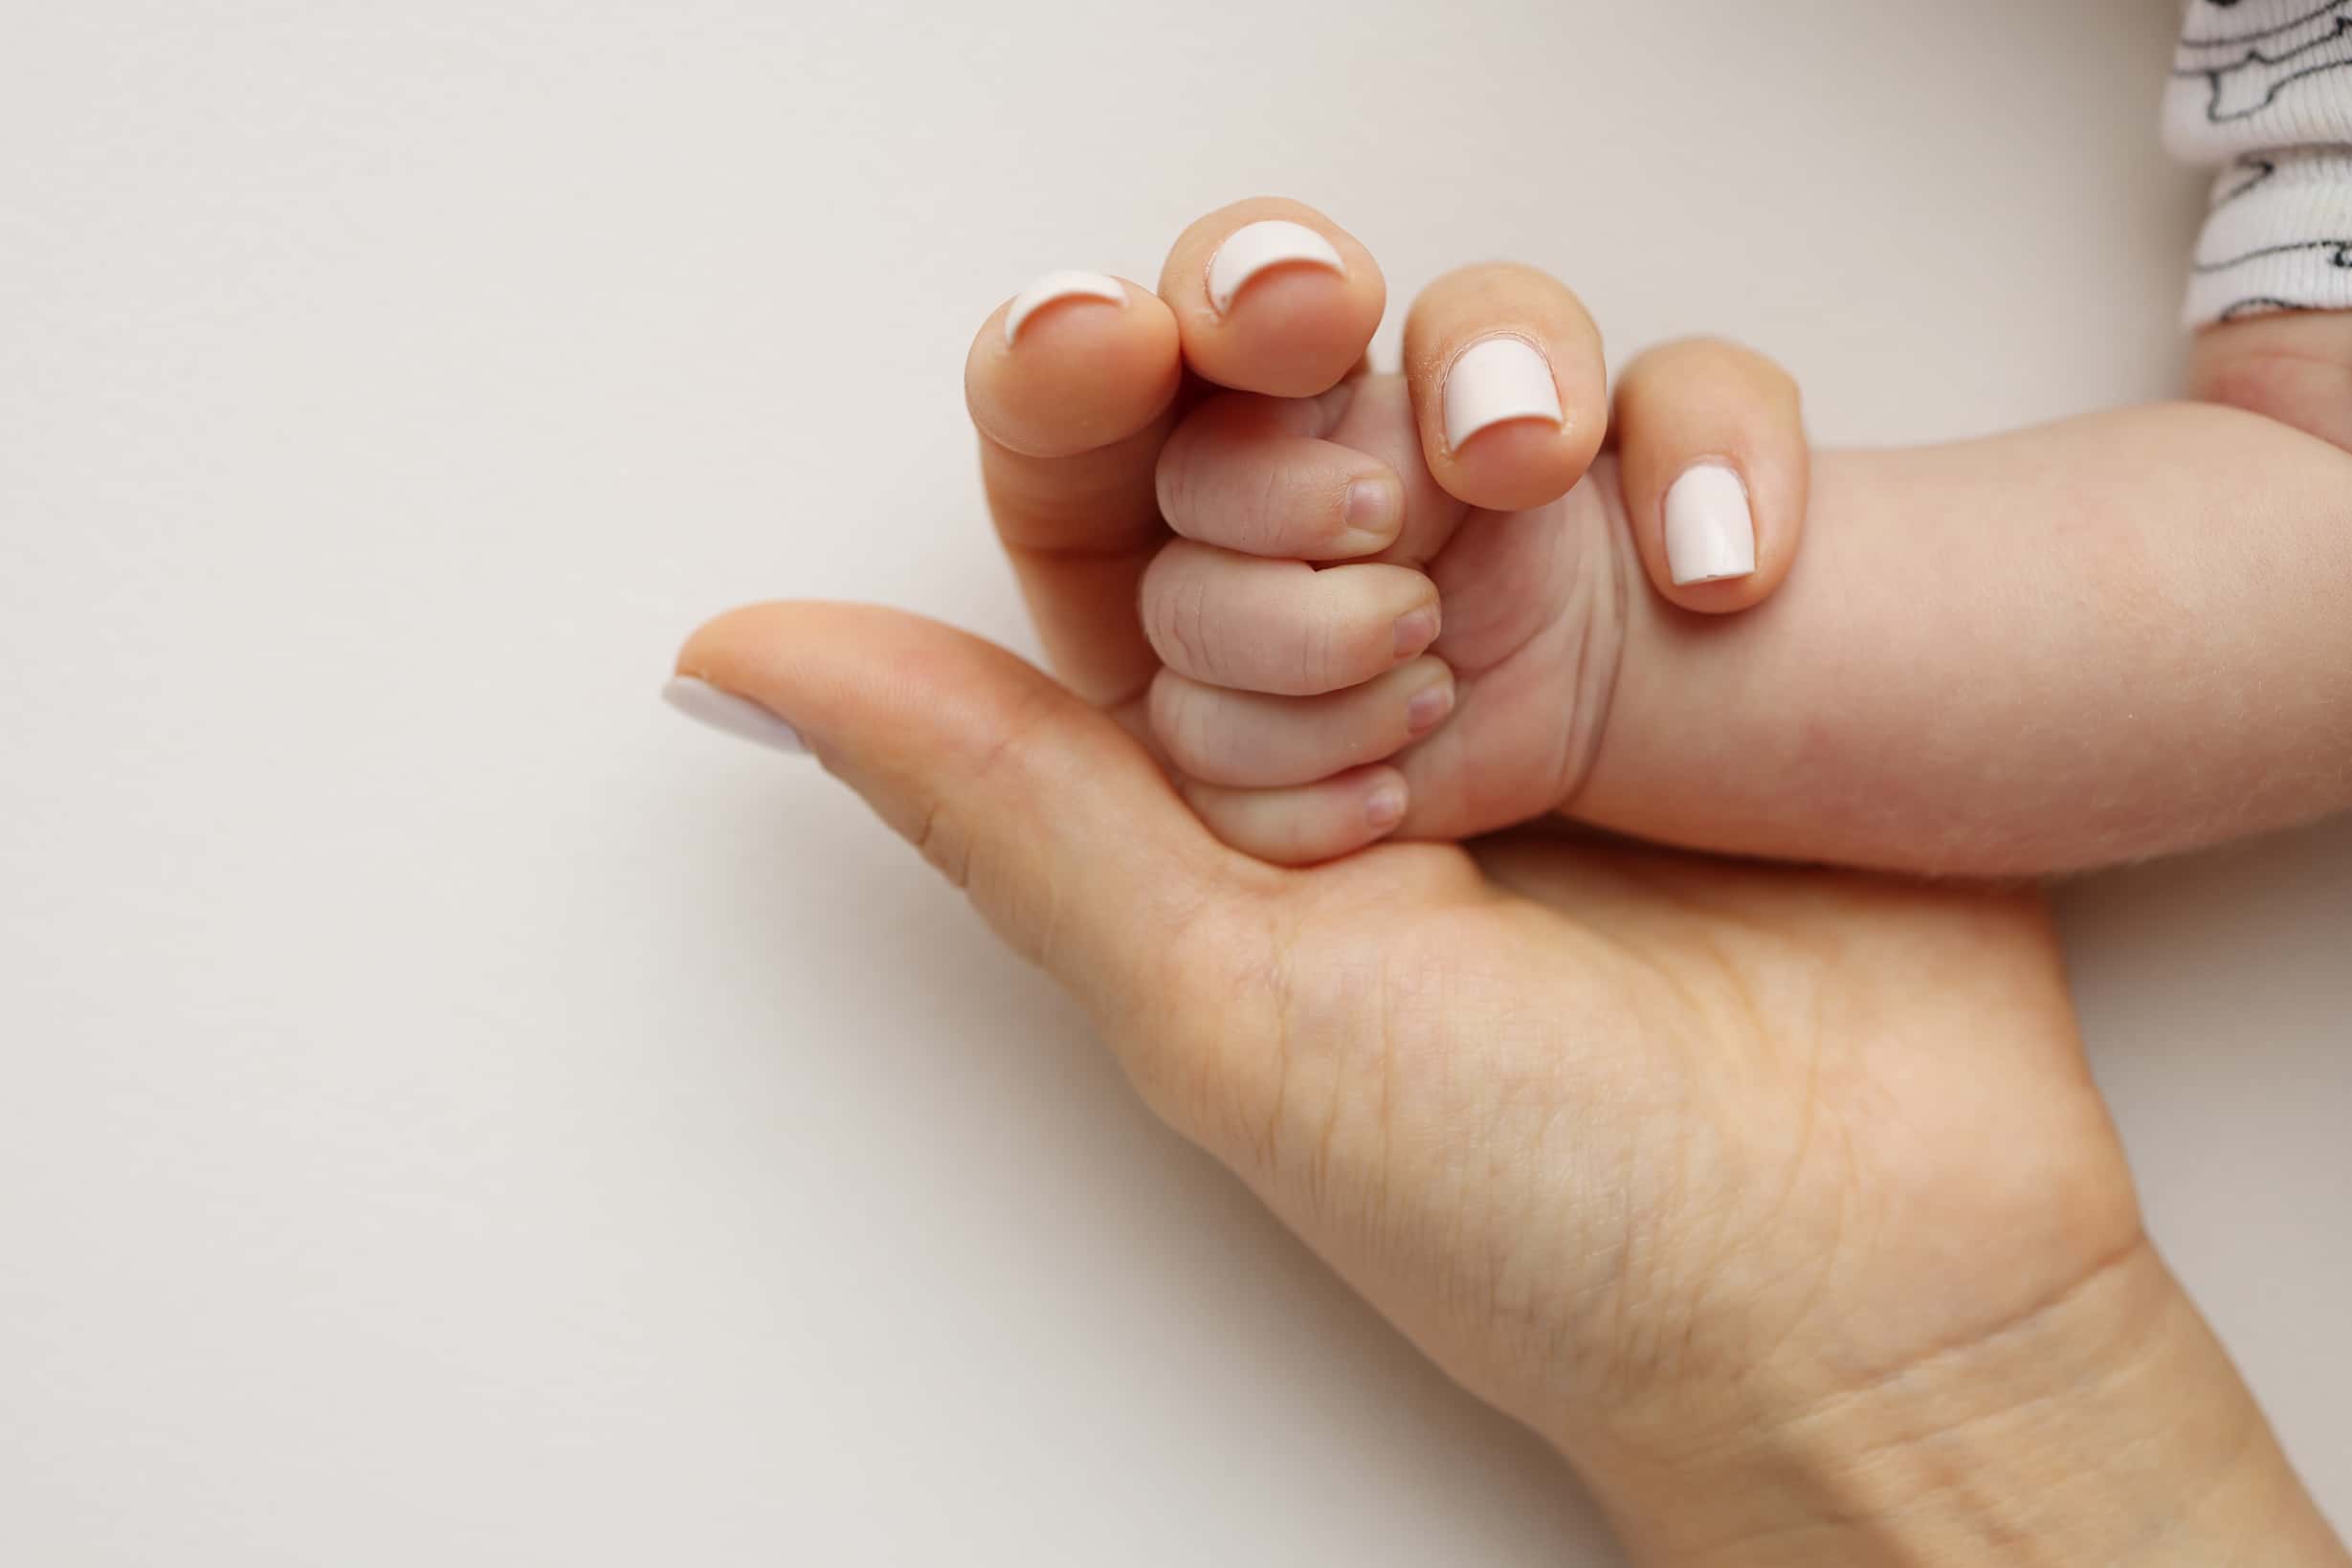 Hands hold the fingers of a newborn baby. The hand of mother.